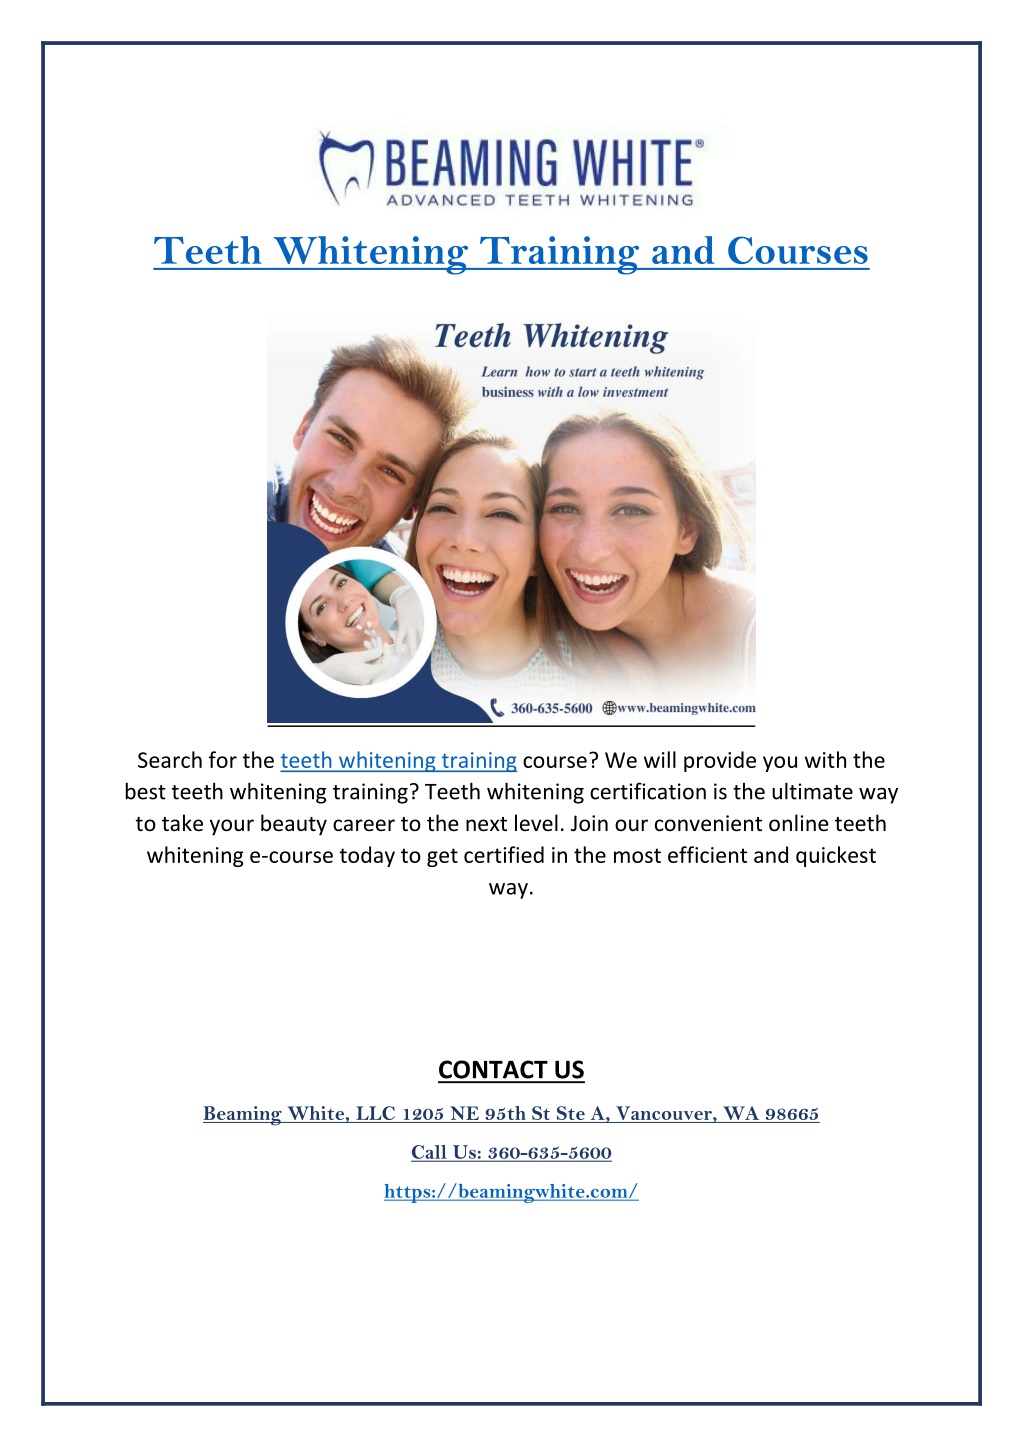 PPT Do the one of the Best Teeth Whitening Courses Online PowerPoint